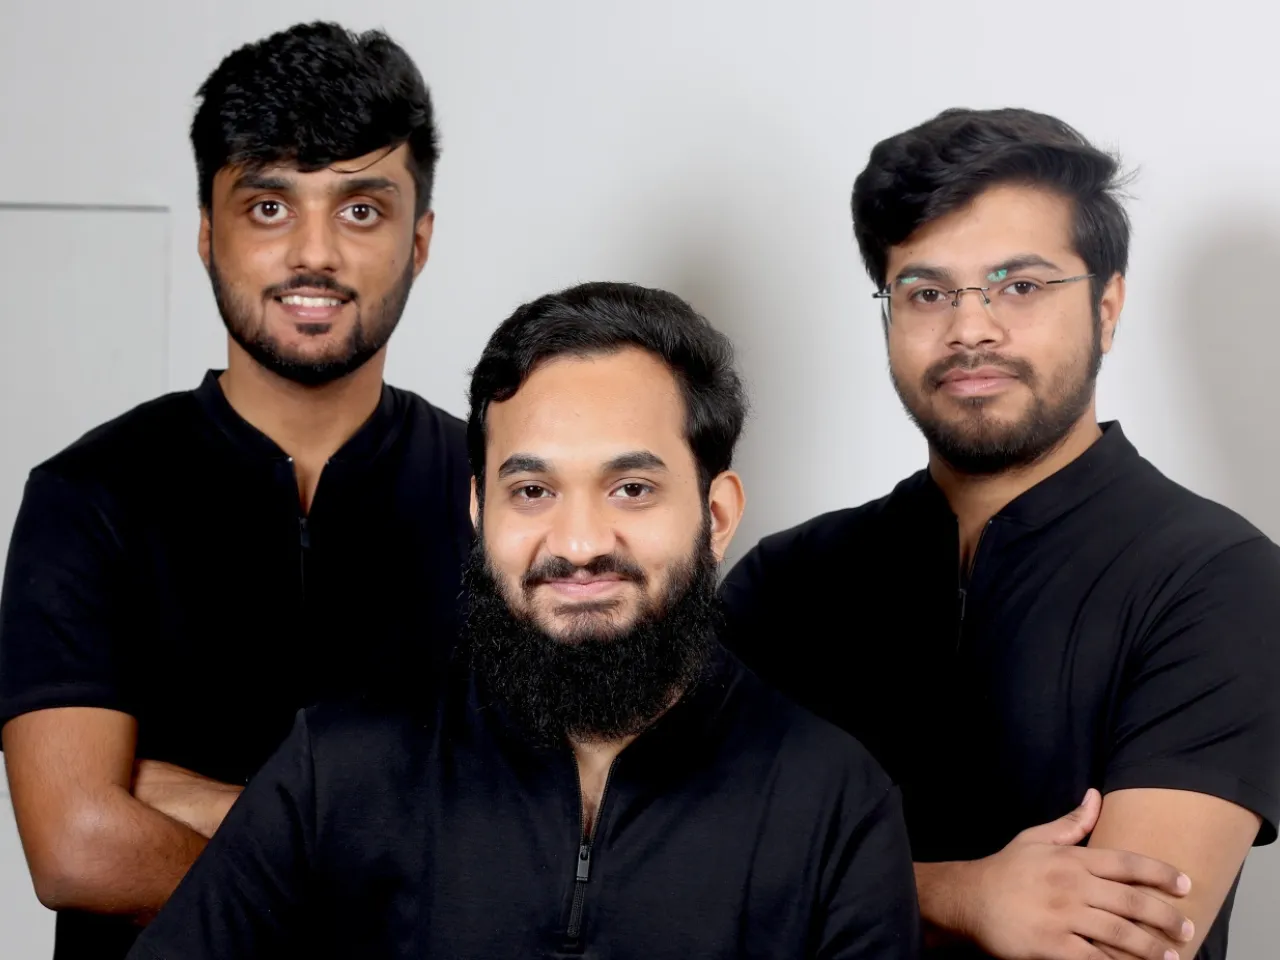 Spacetech infrastructure startup Digantara raises $10M led by Peak XV Partners, others